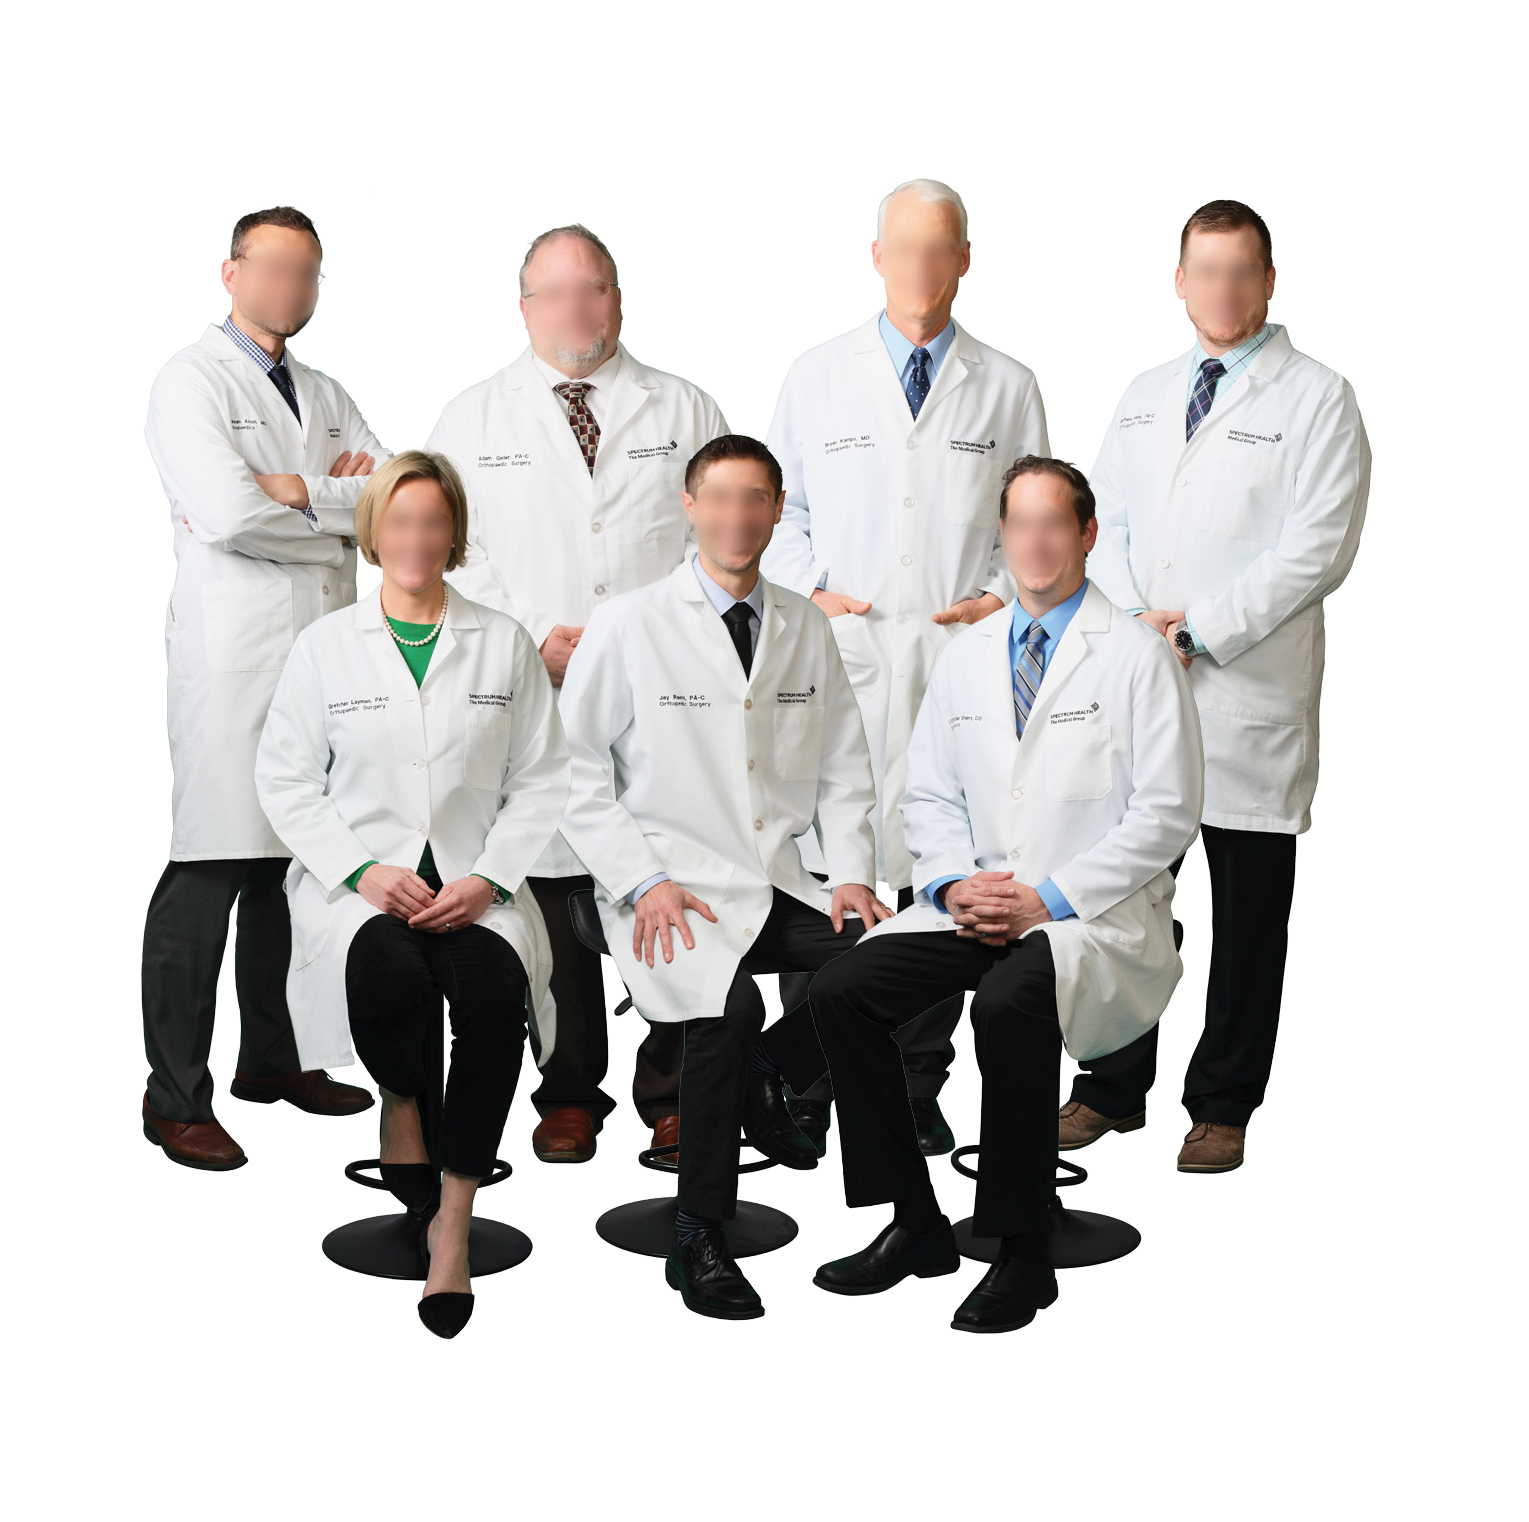 17.52.9.F - Group Images of Orthopedics Teams - Without Names-1.png